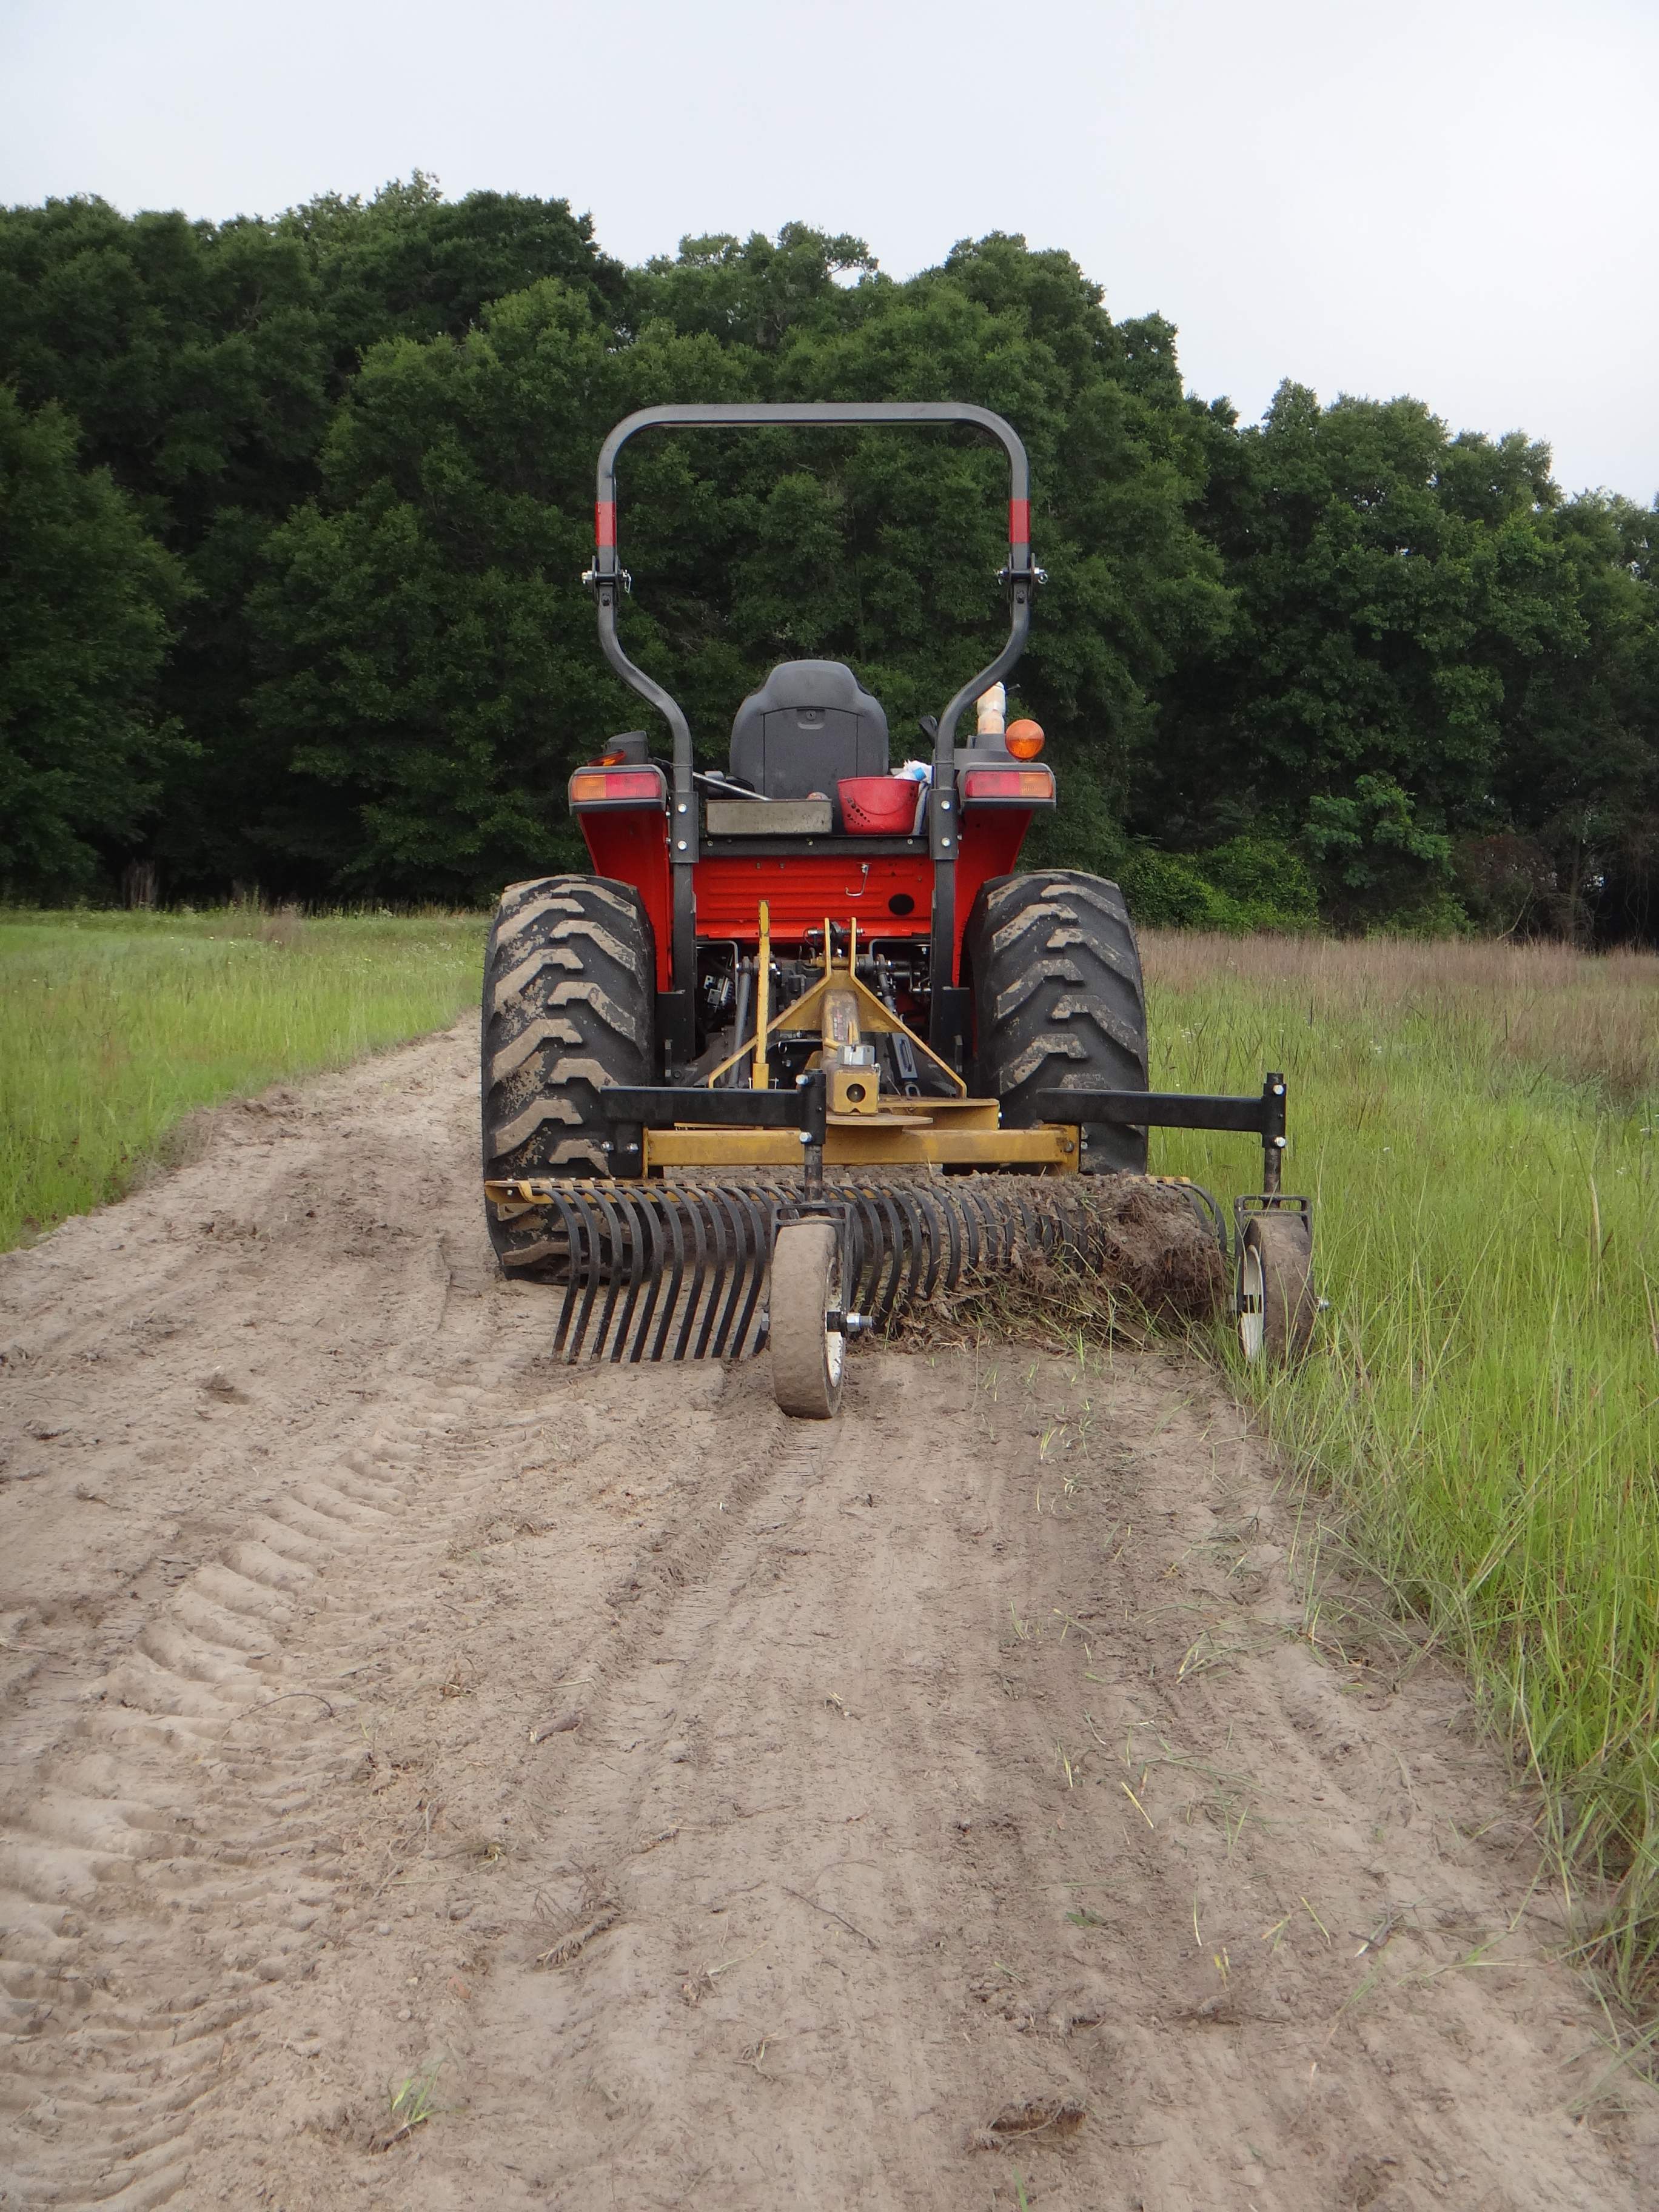 Rake Landscape Recommendations, What Is A Tractor Landscape Rake Used For